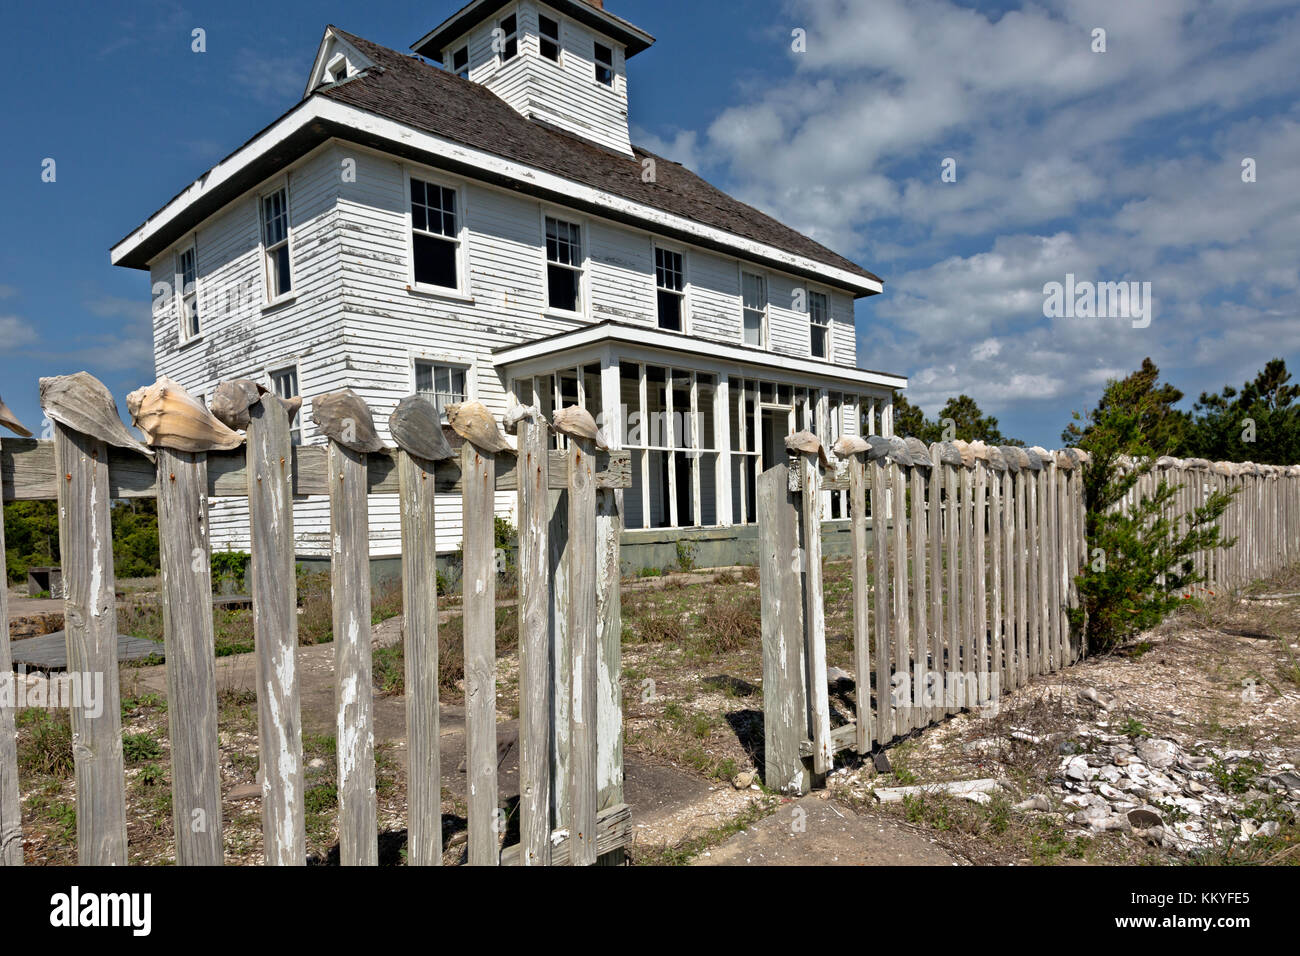 NC01001-00...NORTH CAROLINA -  The Fence decorated with whelk shells at the old Life Saving Station/Coast Guard Station now preserved in the Cape Look Stock Photo